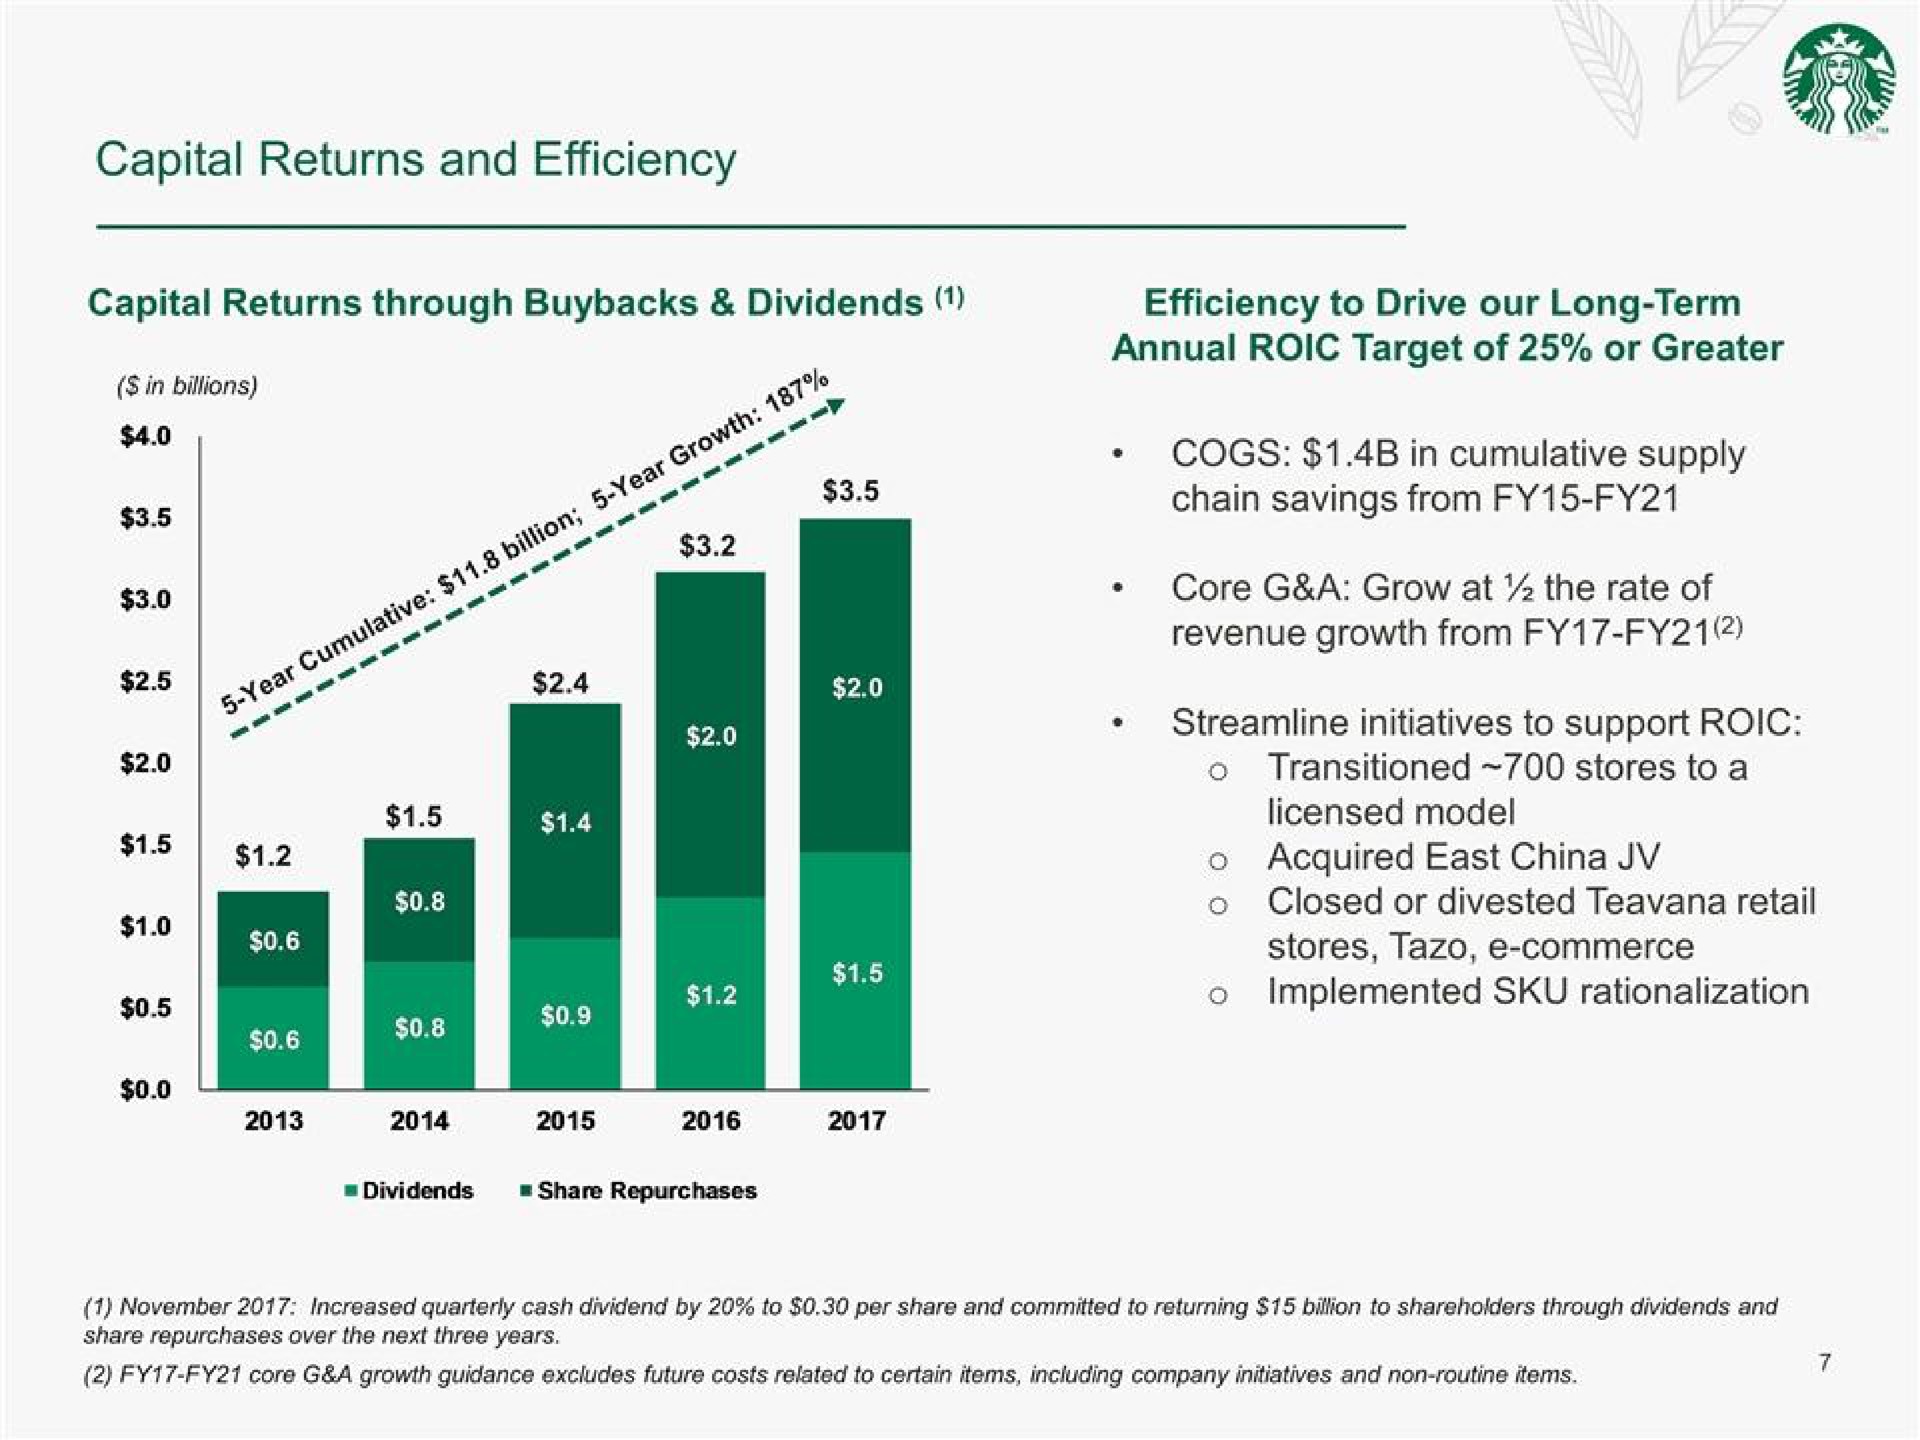 capital returns and efficiency capital returns through dividends efficiency to drive our long term annual target of or greater saa as sie cogs in cumulative supply chain savings from core a grow at the rate of revenue growth from transitioned stores toa acquired east china closed or divested retail stores commerce implemented rationalization | Starbucks